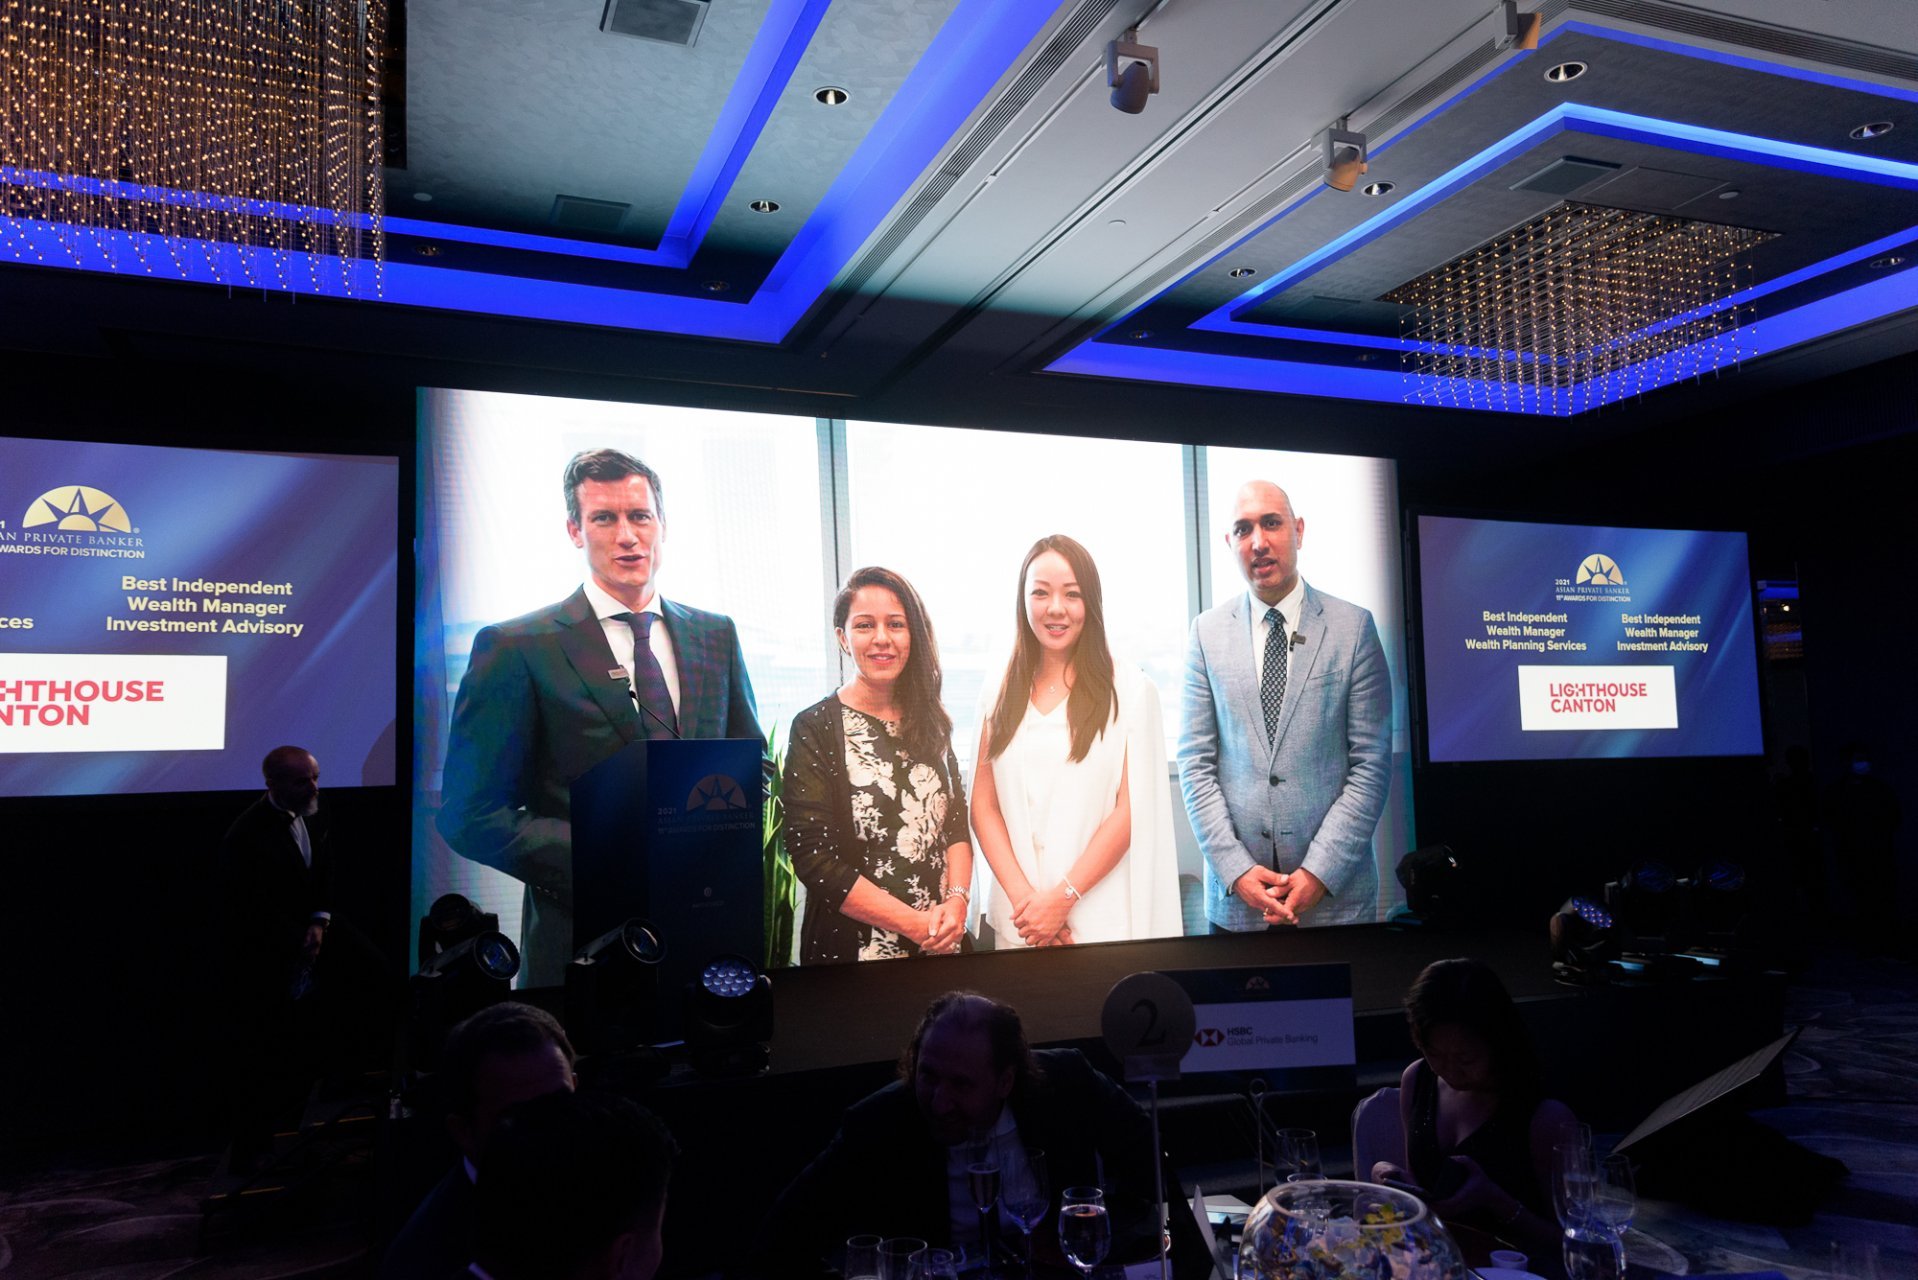 Representatives from Lighthouse Canton join us virtually to celebrate their win as Best Independent Wealth Manager – Investment Advisory and Best Independent Wealth Manager – Wealth Planning Services